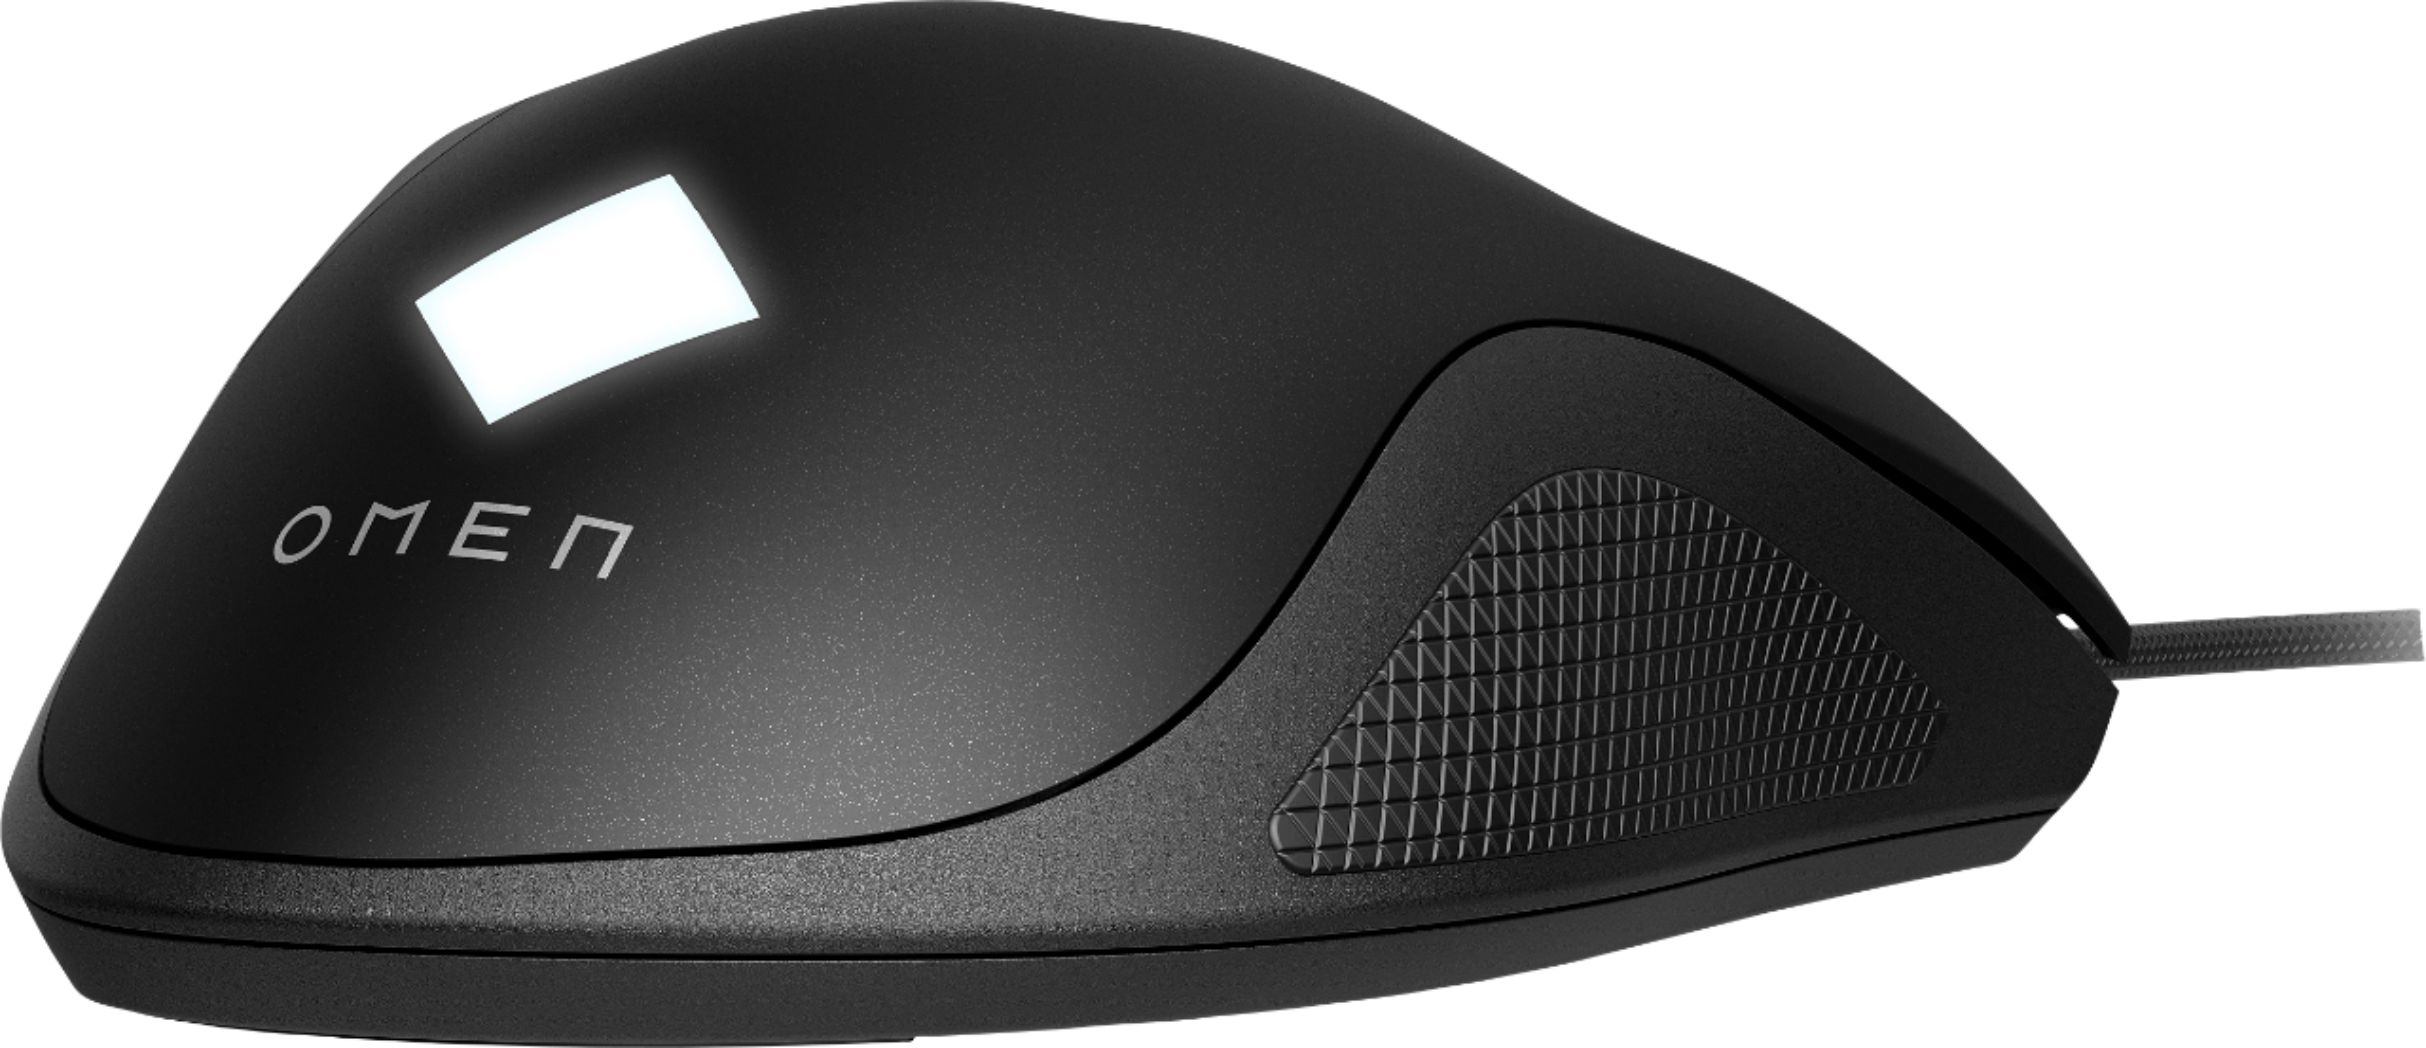 Angle View: HP OMEN - Vector Wired Optical Gaming Mouse with Adjustable Weight - Black